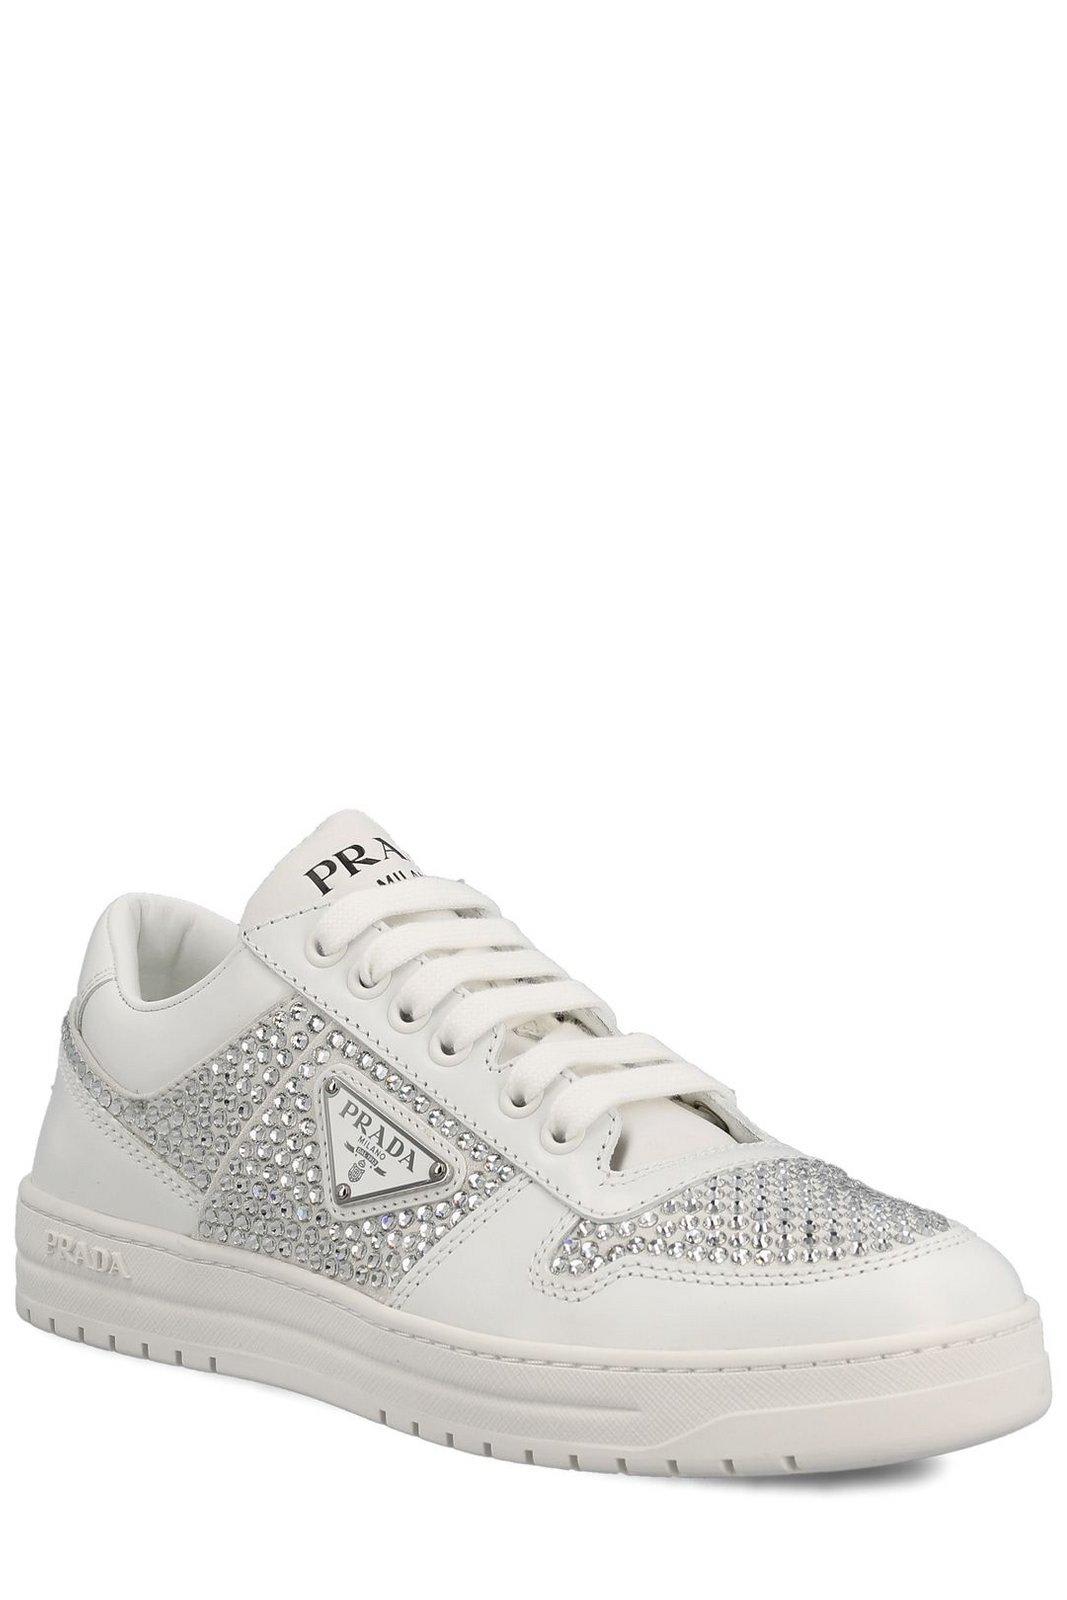 Shop Prada Embellished Lace-up Sneakers